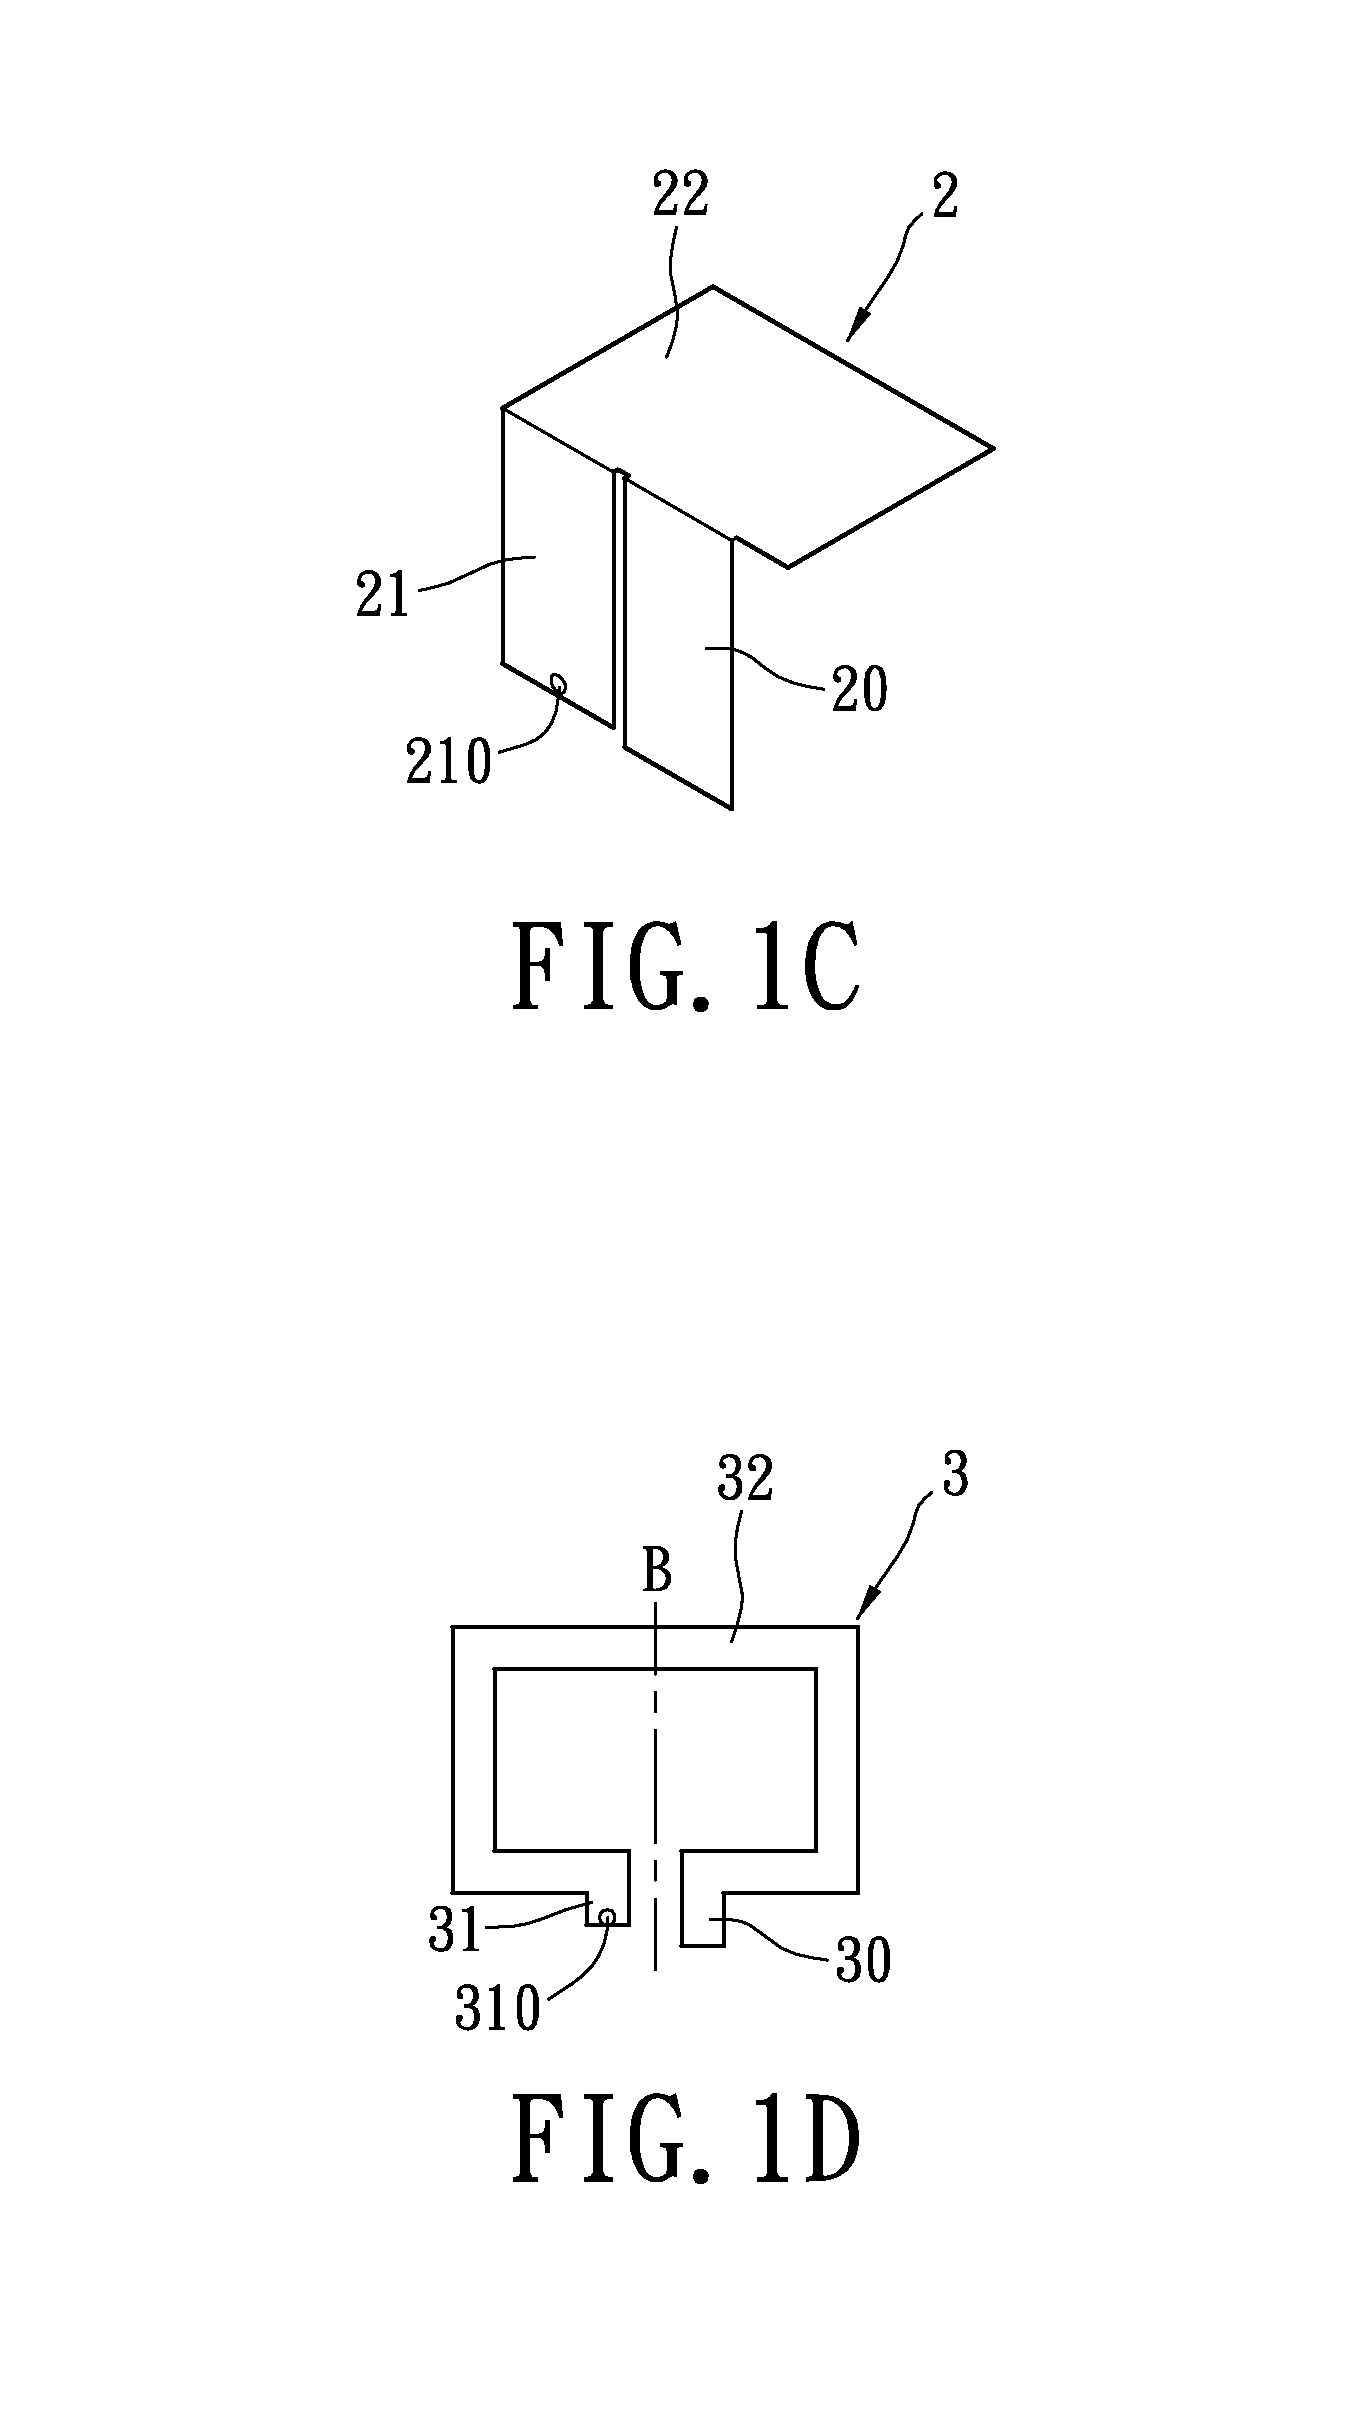 Hybrid multiple-input multiple-output antenna module and system of using the same